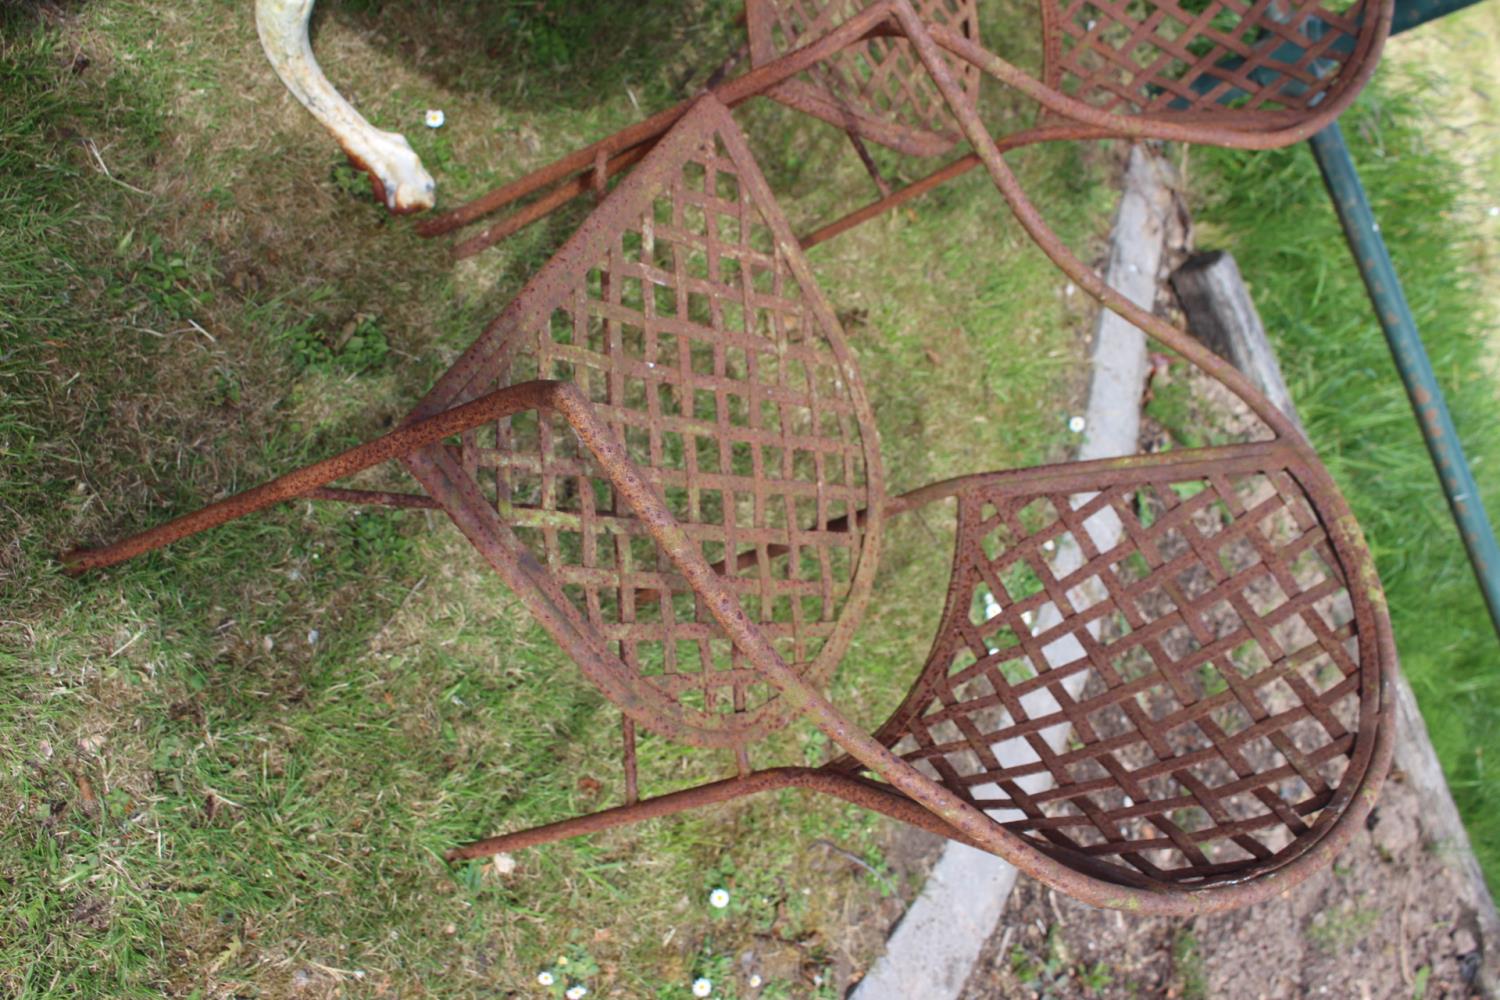 Cast iron garden table and four chairs. - Image 2 of 2